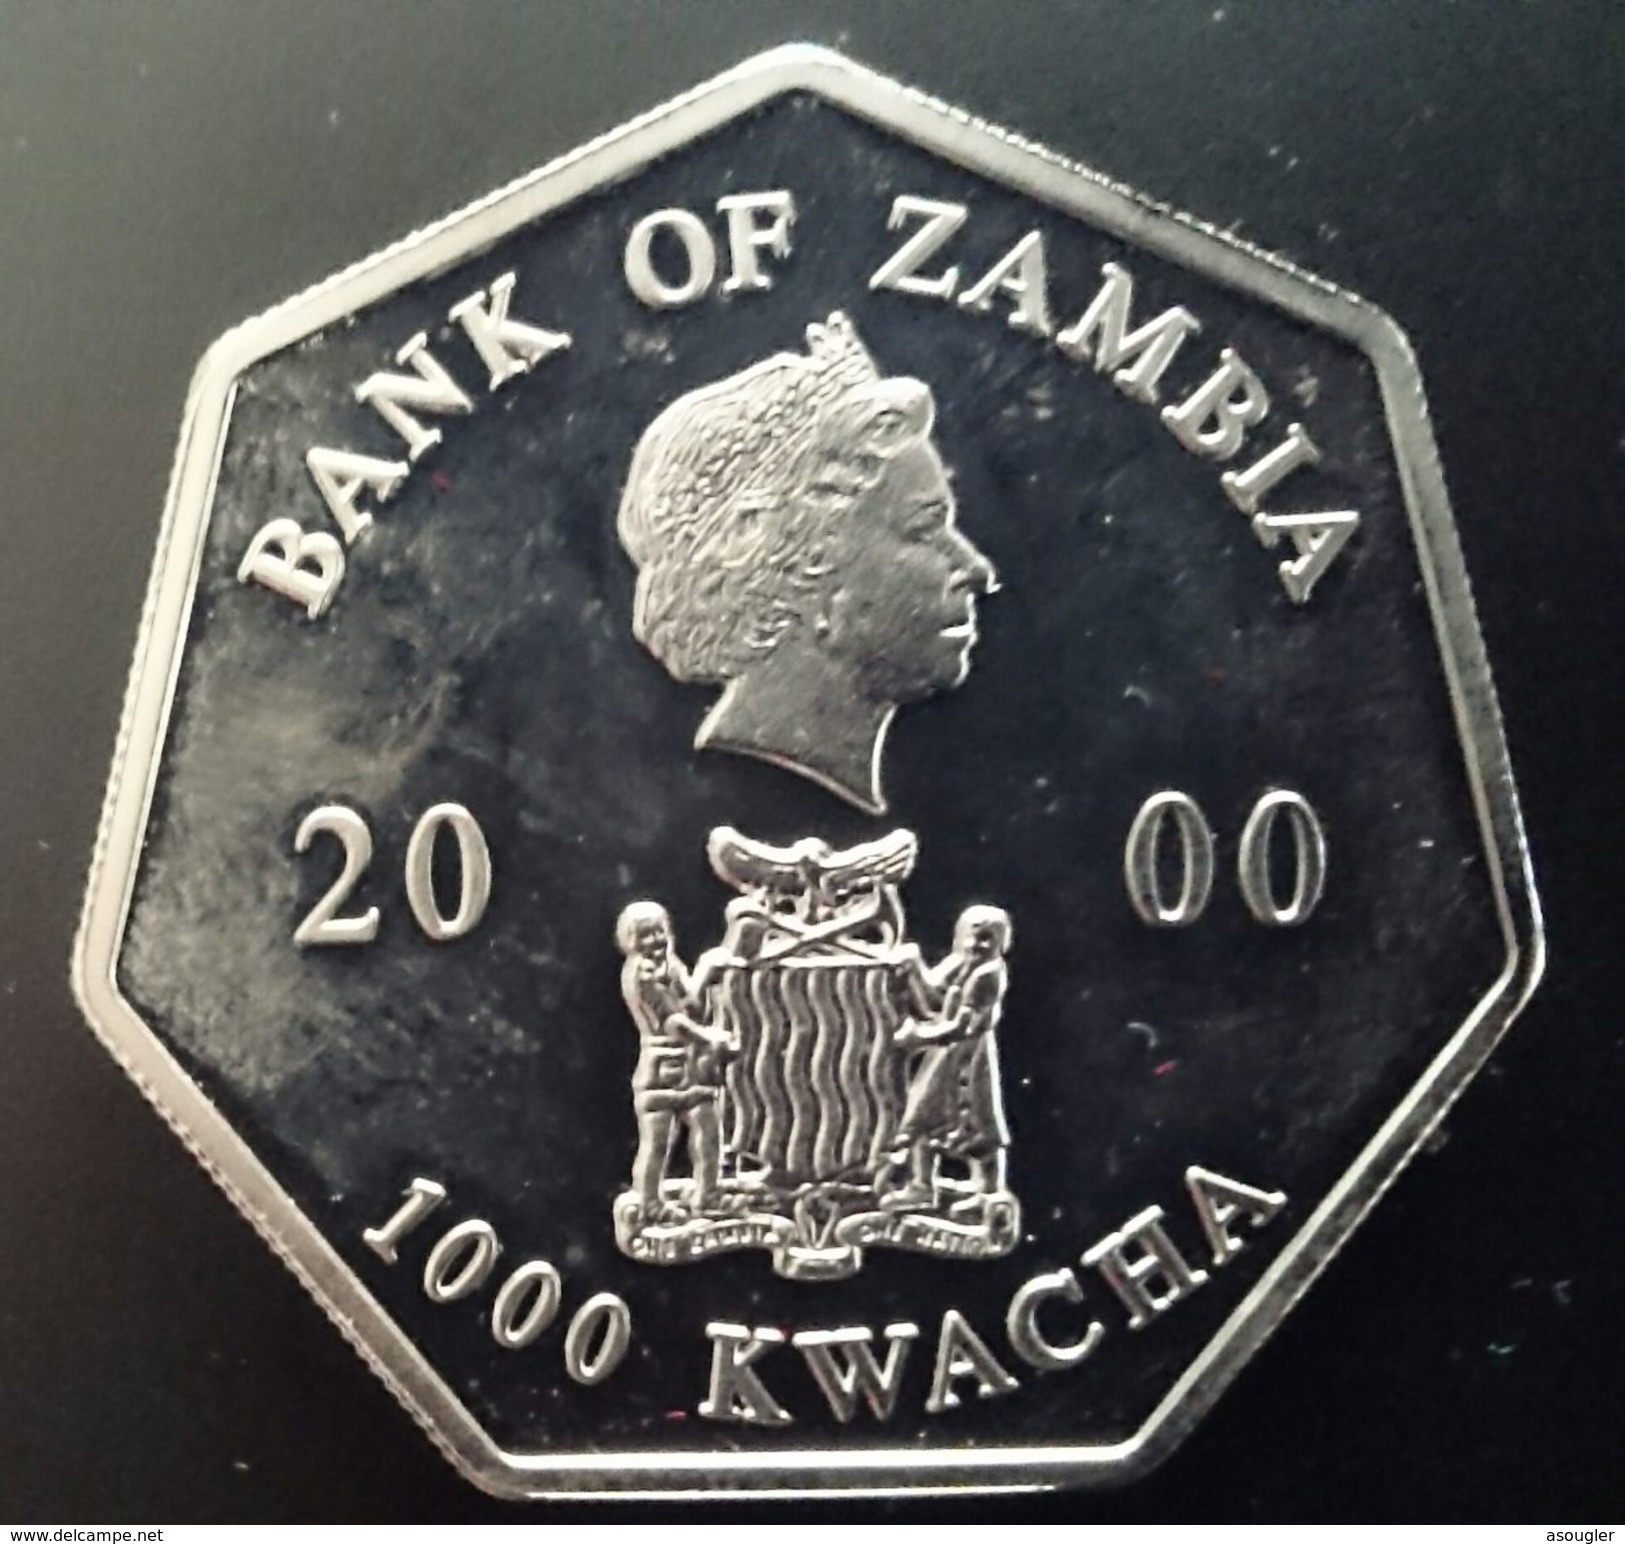 ZAMBIA 1000 KWACHA 2000 PROOF "Dated Calendar 2001 Within Circular Design" Free Shipping Via Registered Air Mail - Sambia